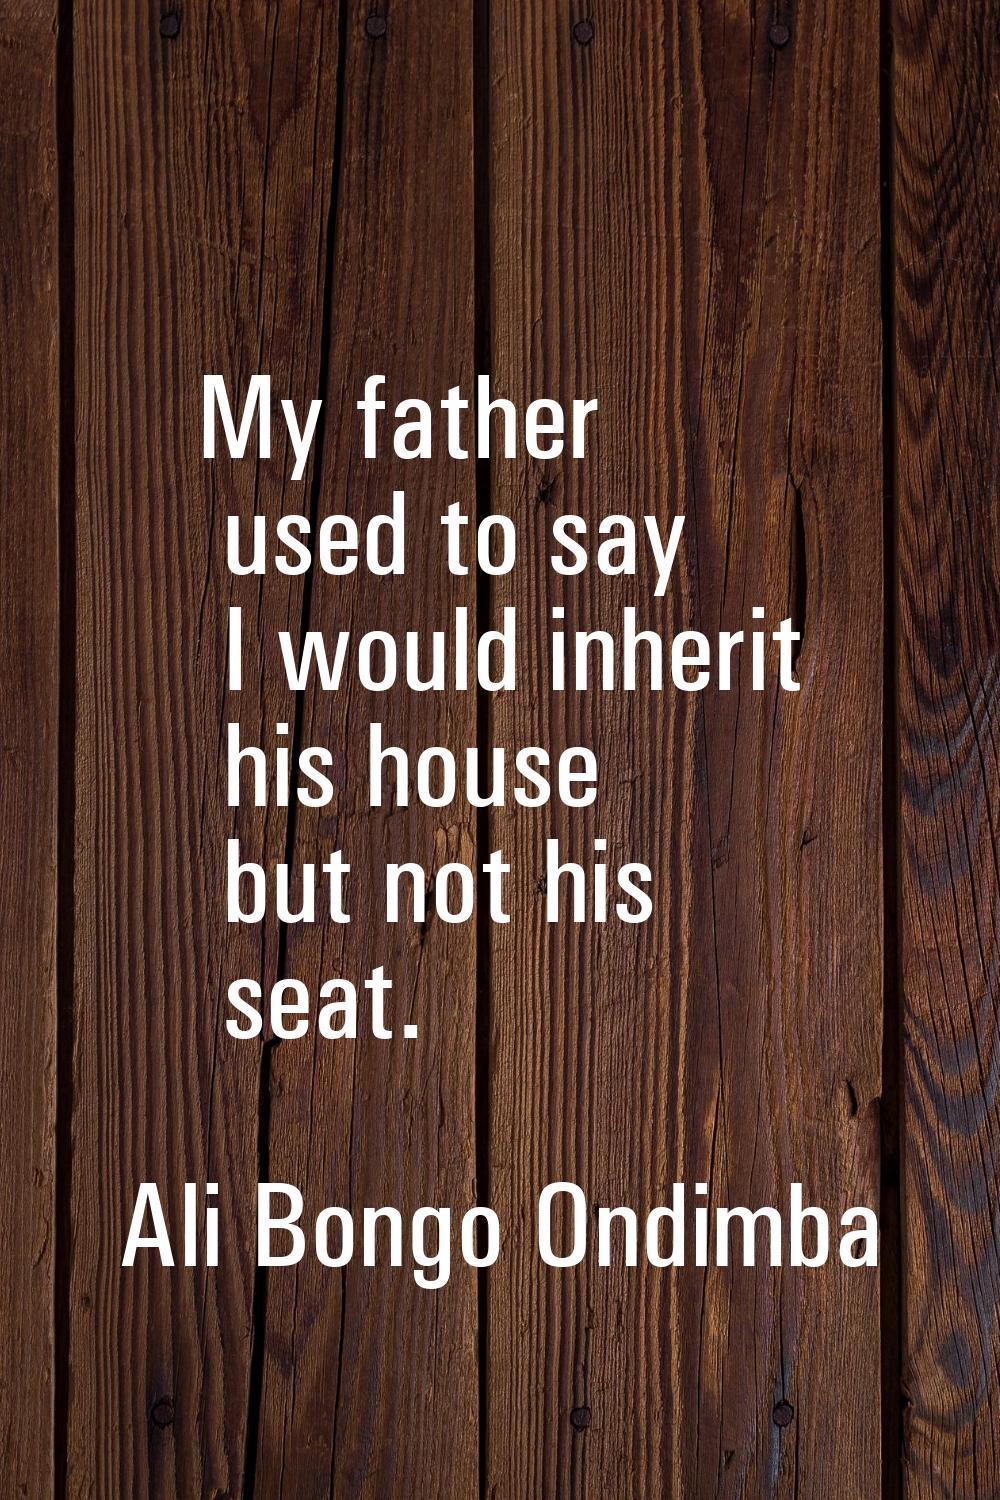 My father used to say I would inherit his house but not his seat.